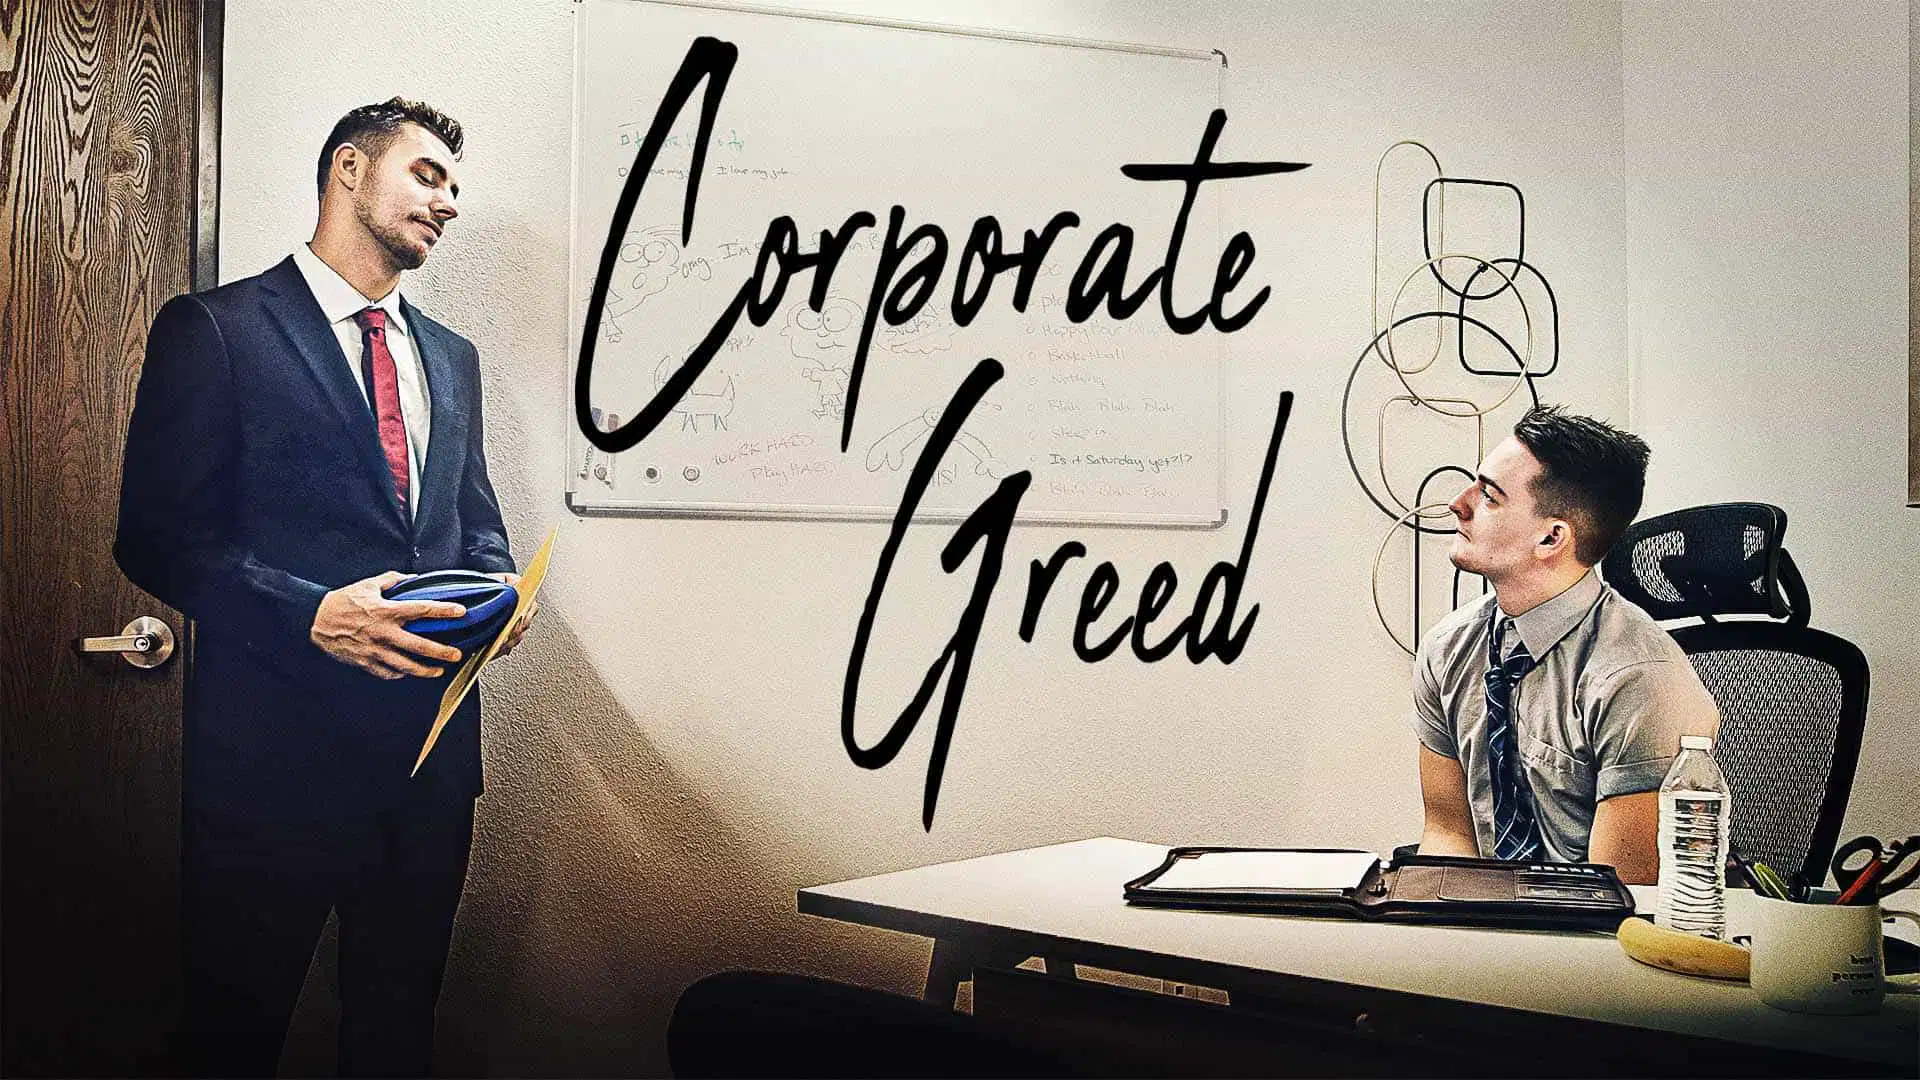 Corporate Greed – Carter Woods and Masyn Thorne